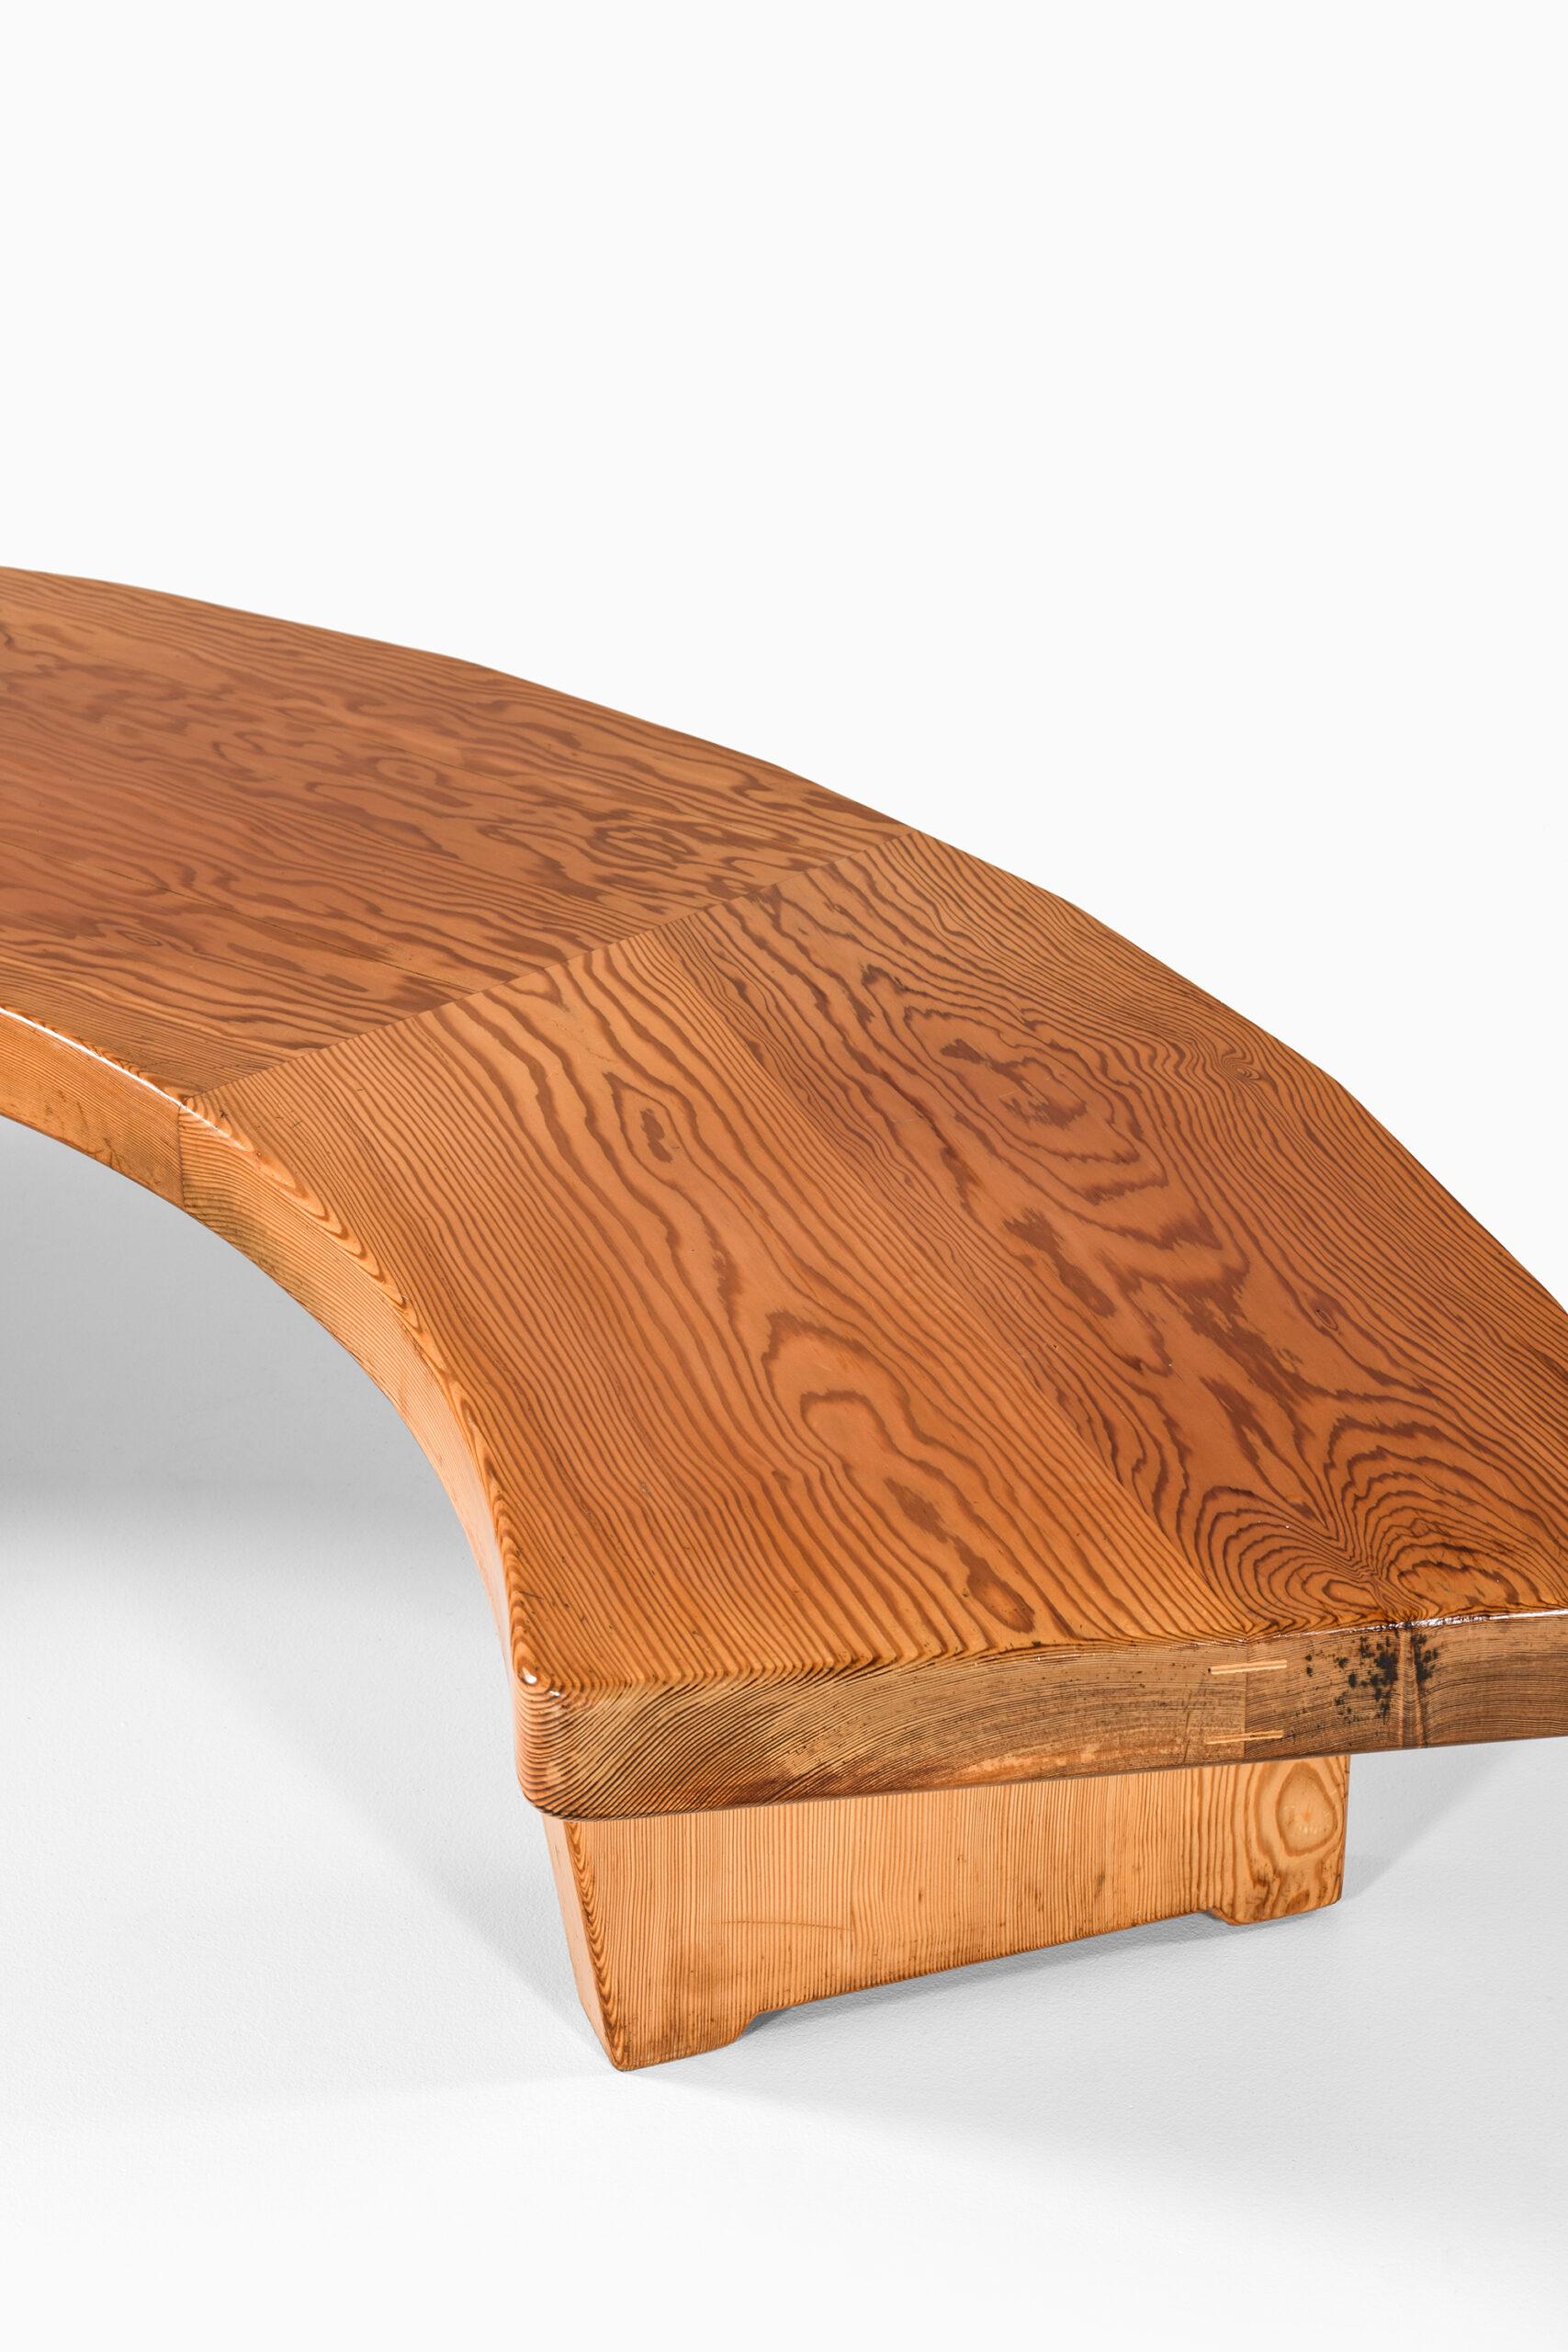 how to build a curved bench